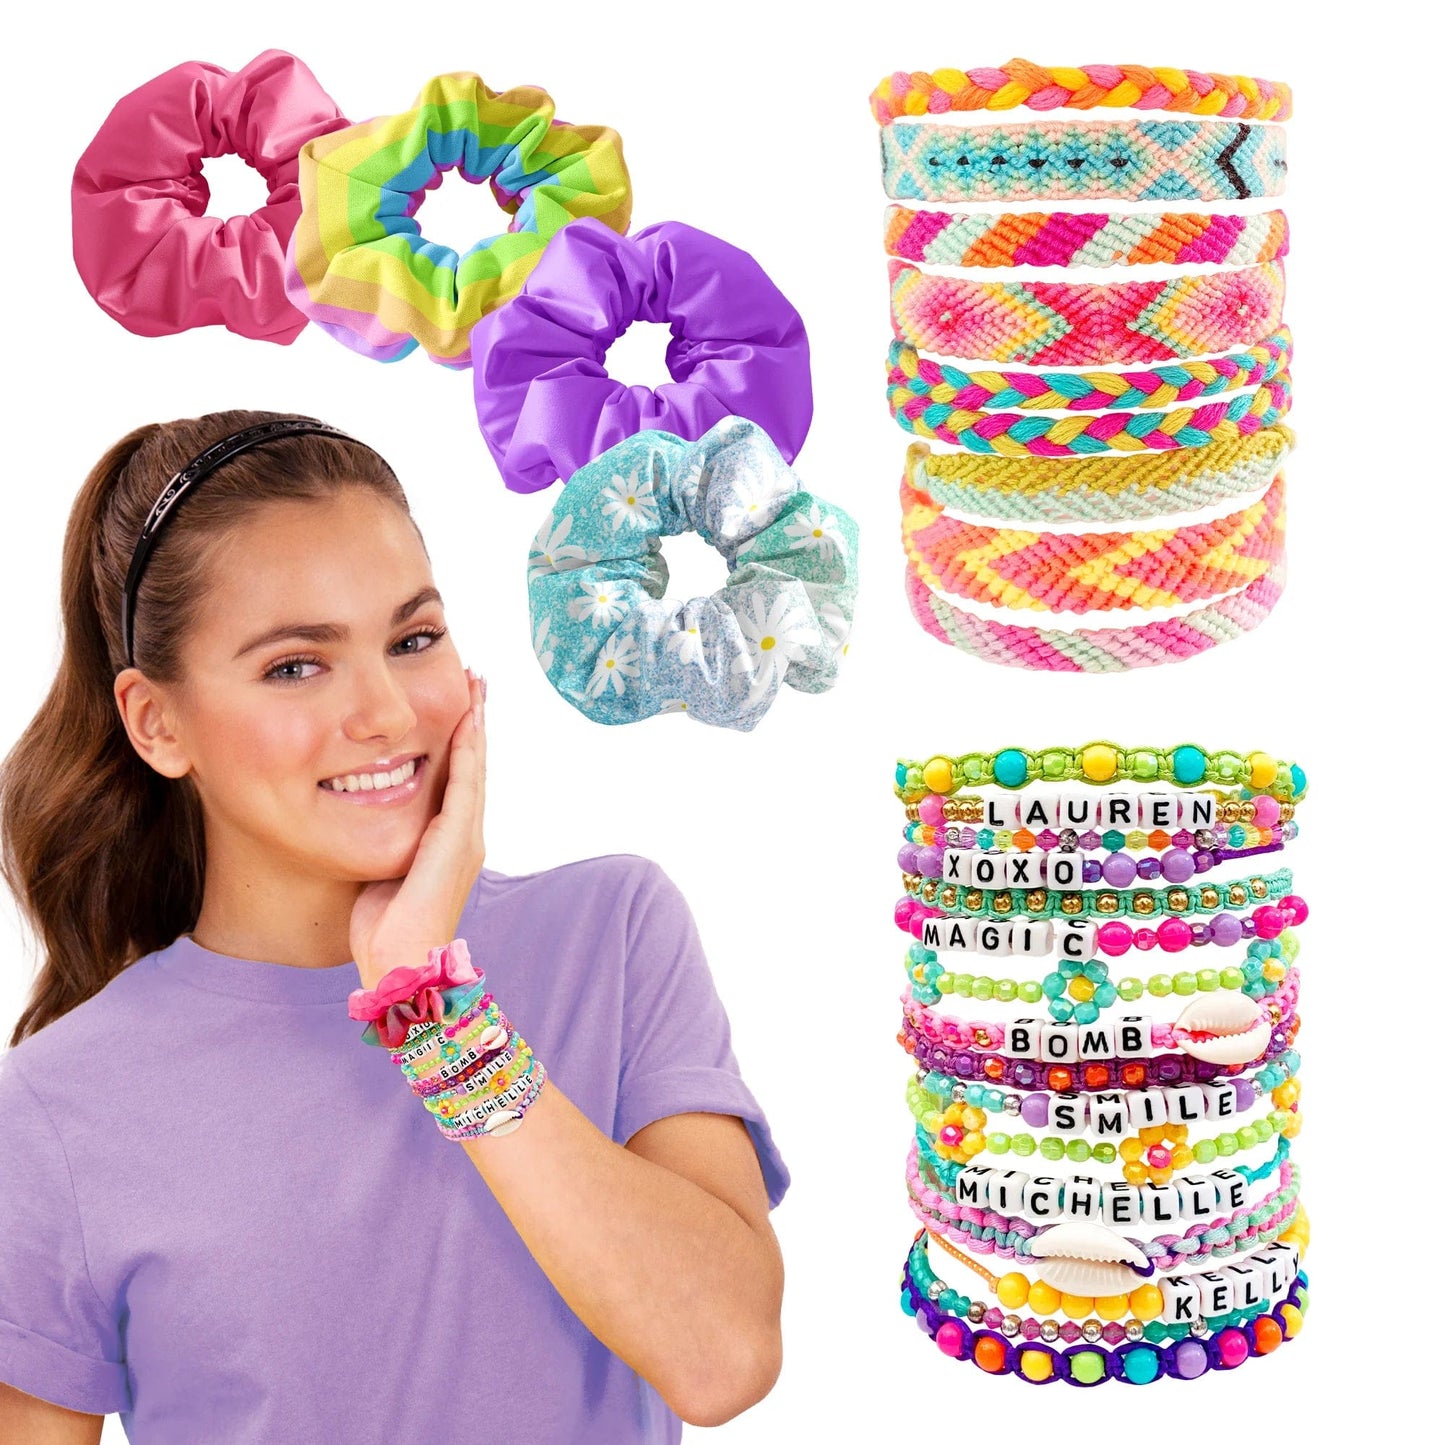 We Cool Jewelry Making Kits ILY Deluxe DIY Jewelry & Accessories Kit